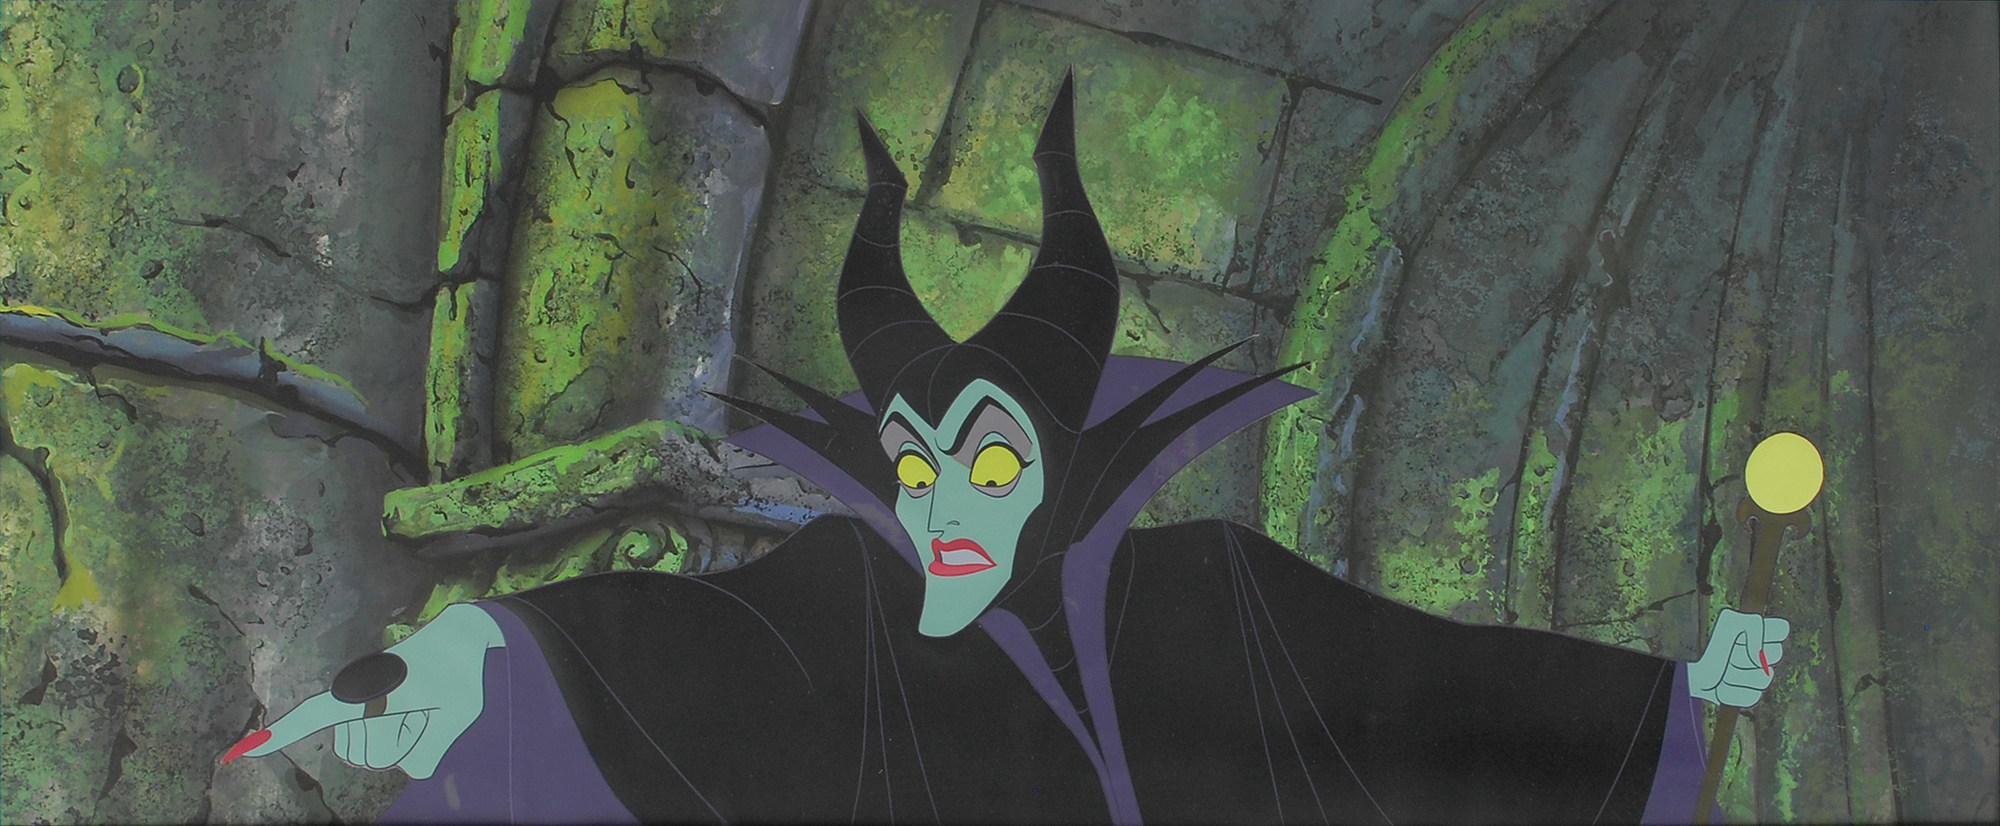 Maleficent production cel and production background from Sleeping